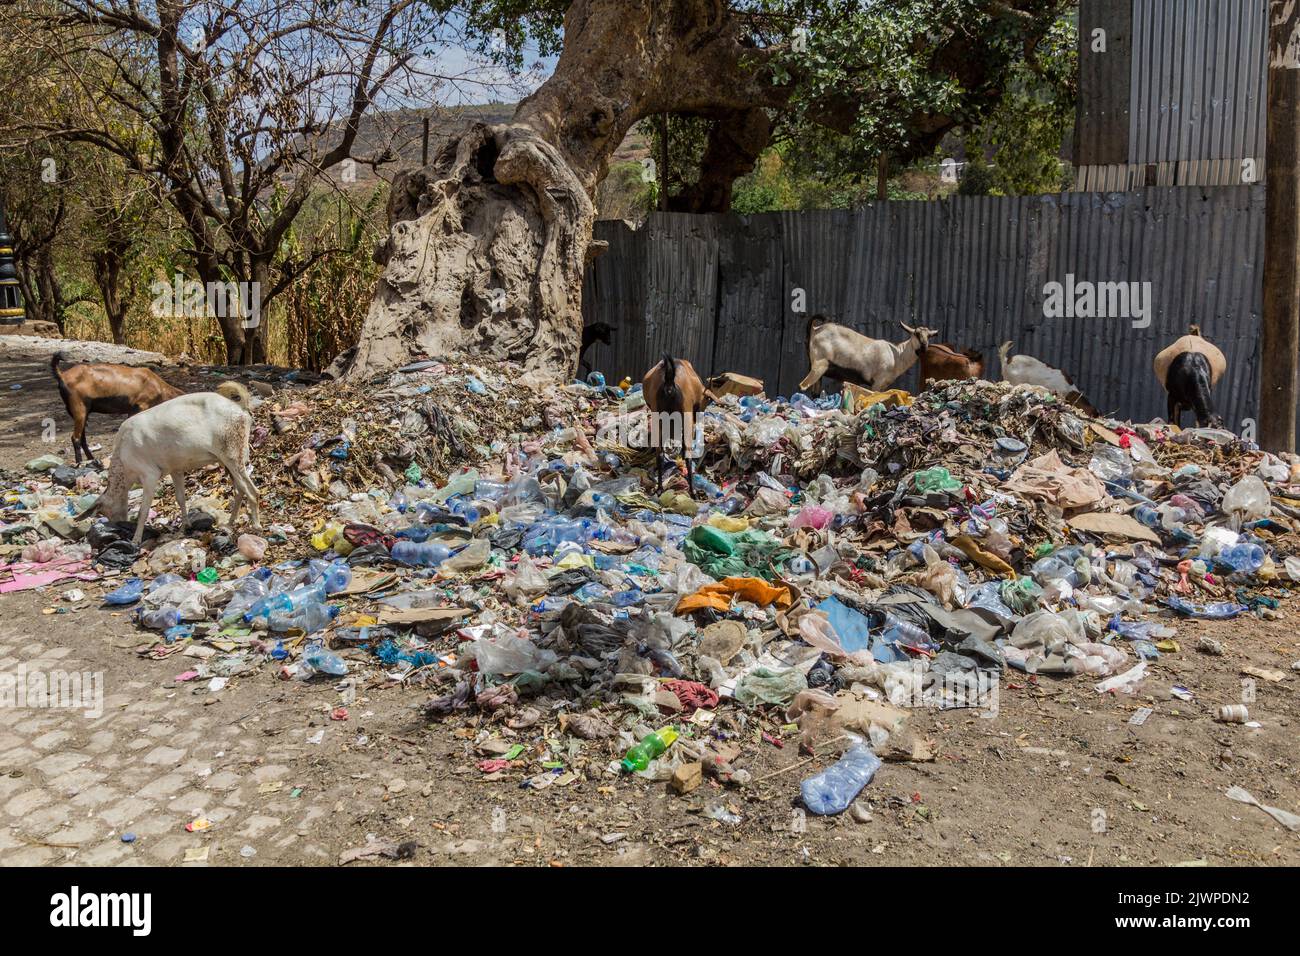 Goats in a pile of rubbish in Harar, Ethiopia Stock Photo